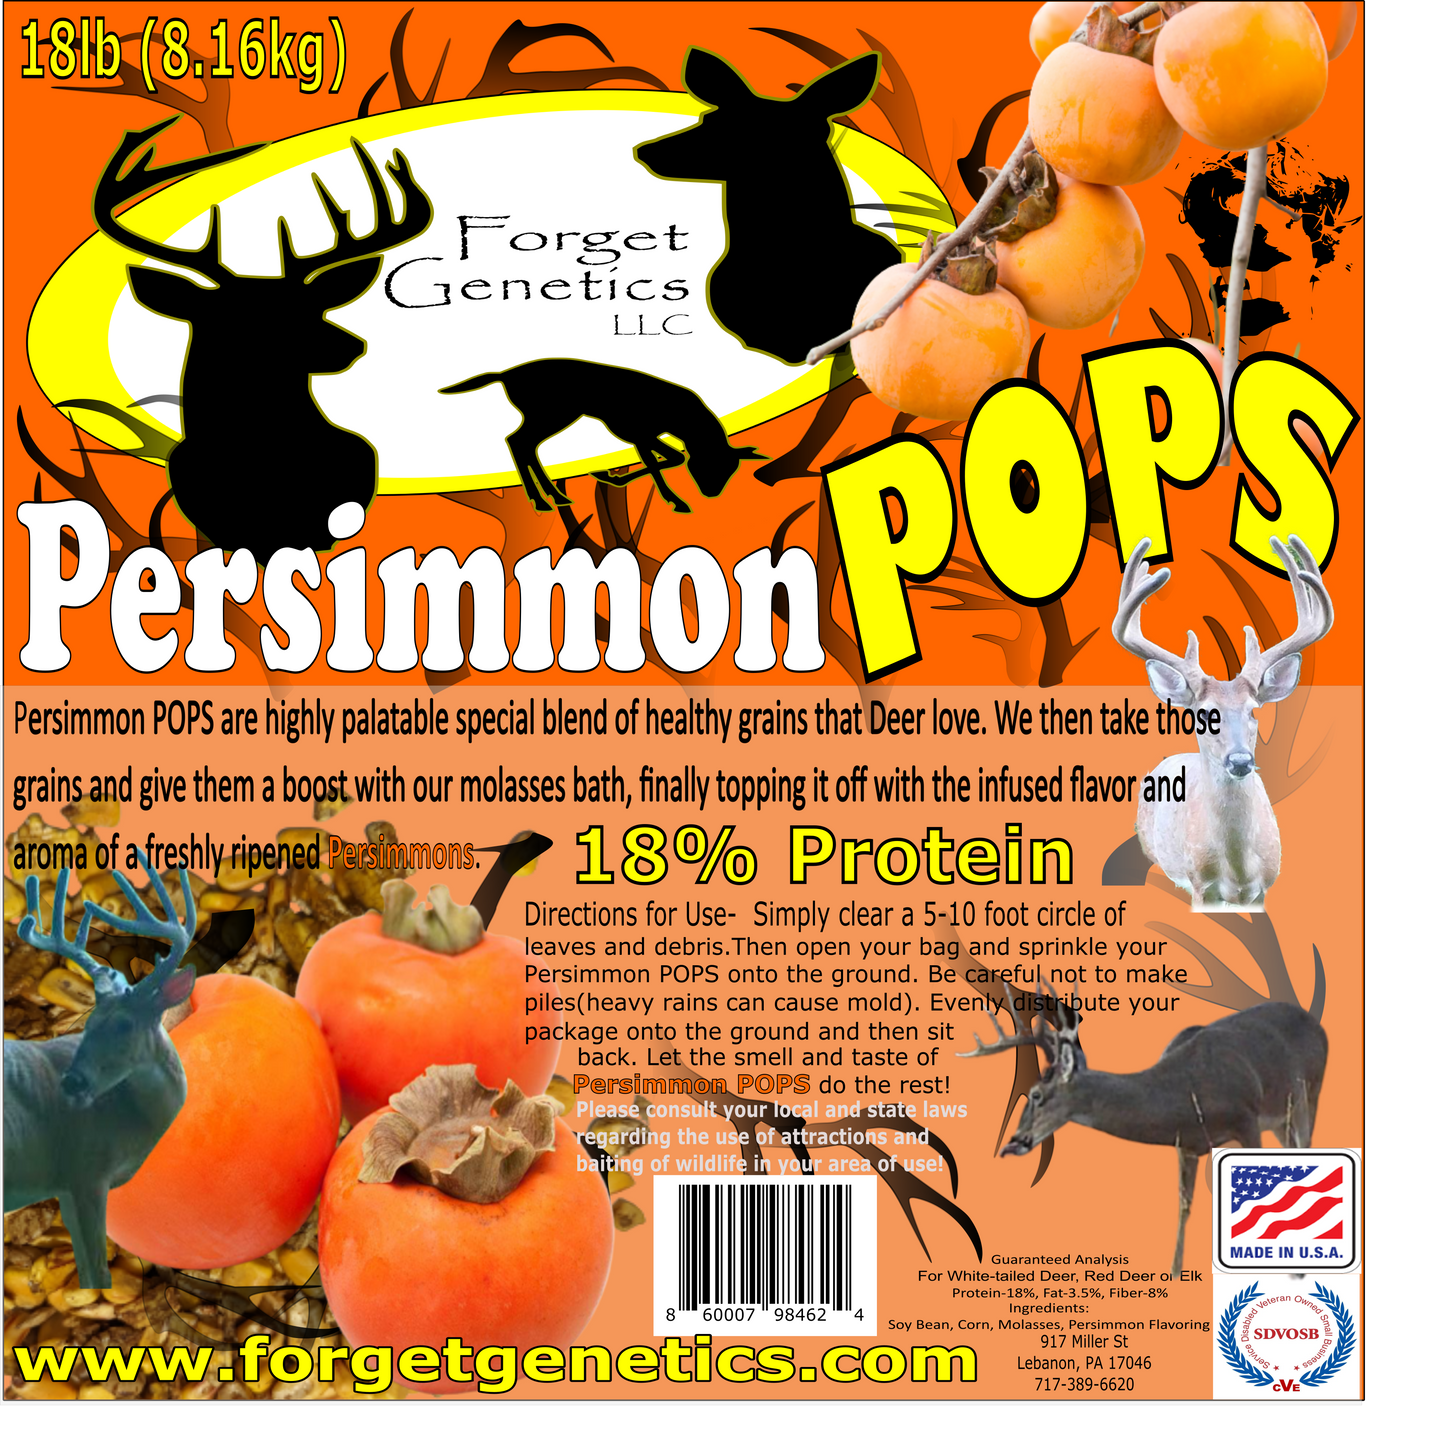 Persimmon POPs 18lb (8.16kg) FREE Shipping!!